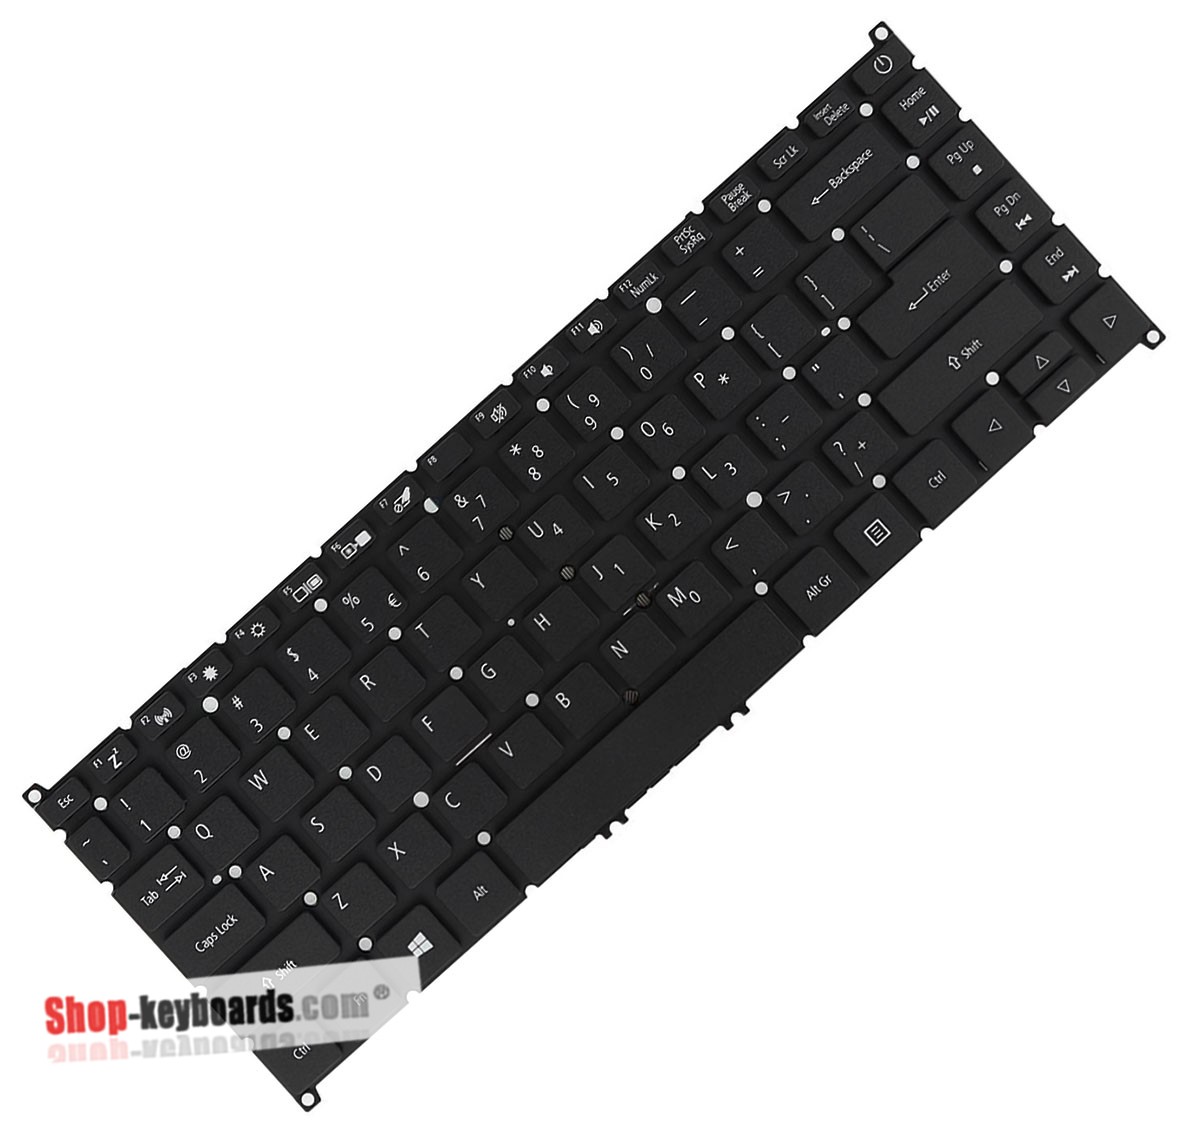 Acer AEZRTJ00210 Keyboard replacement